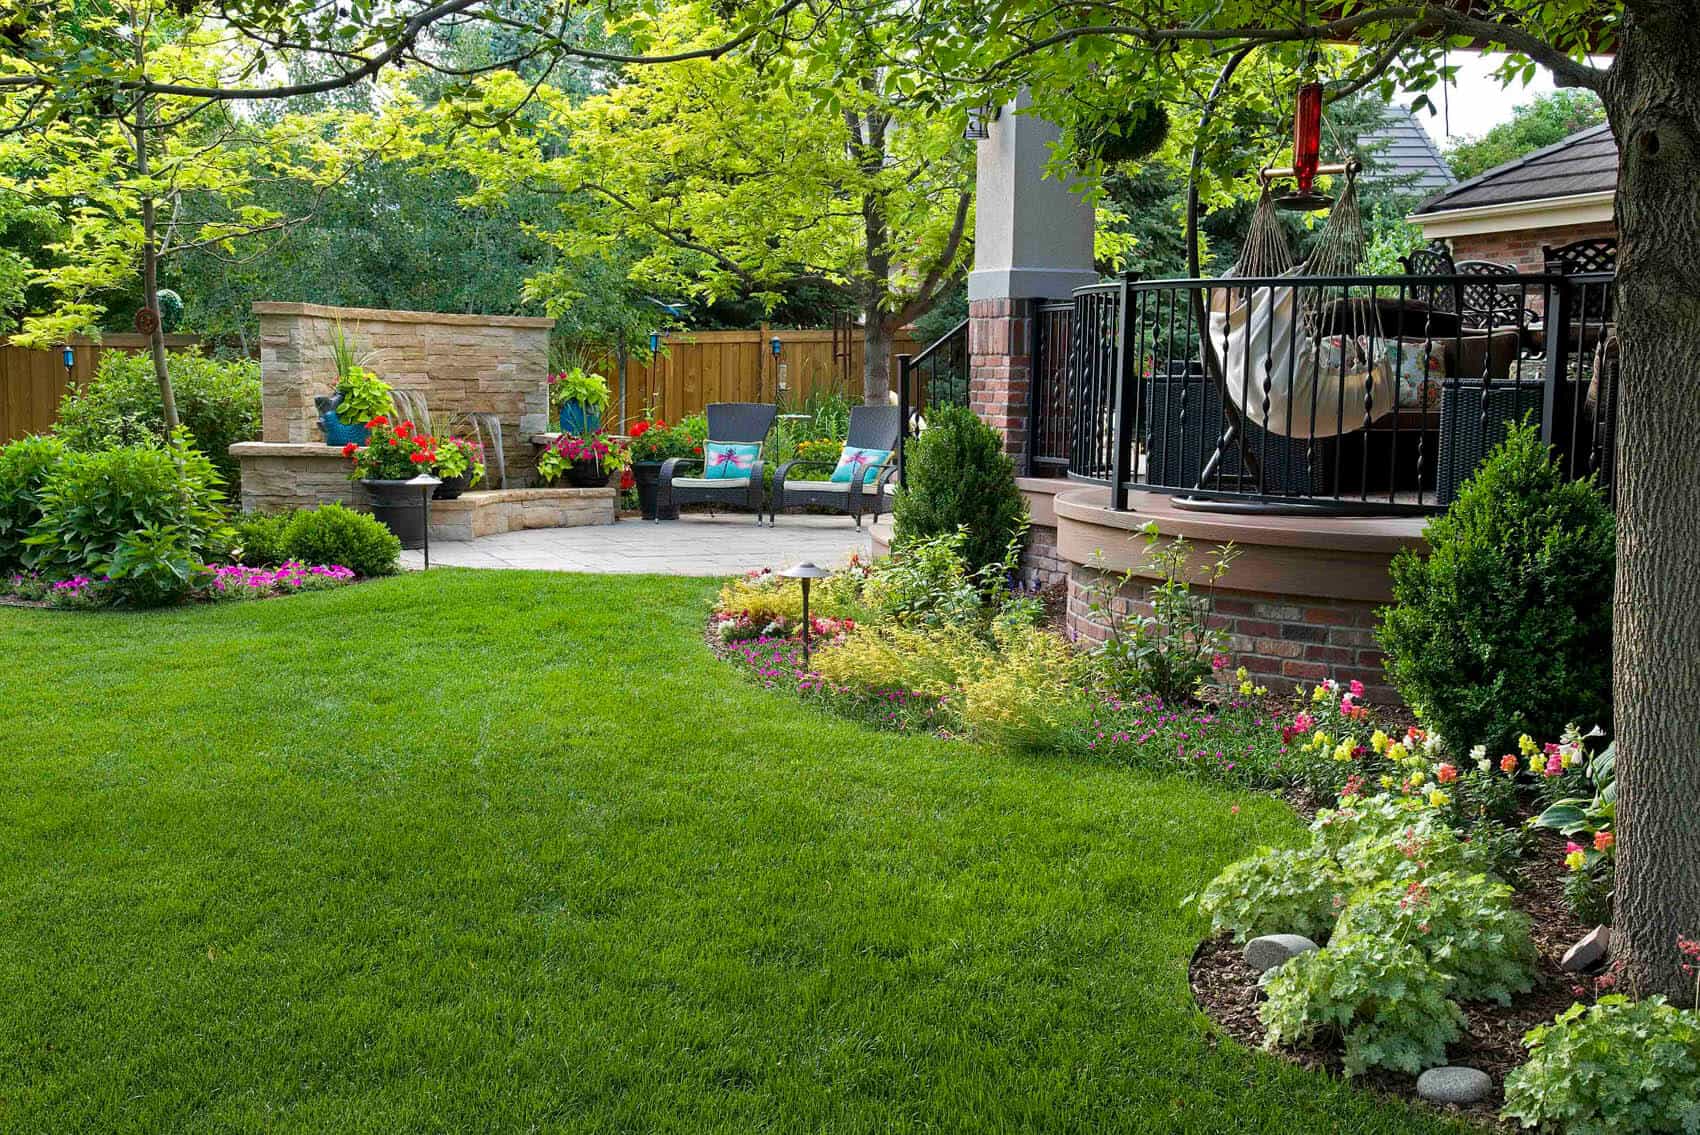 Blog Featured – Proactive maintenance now brings beautiful spring growth.